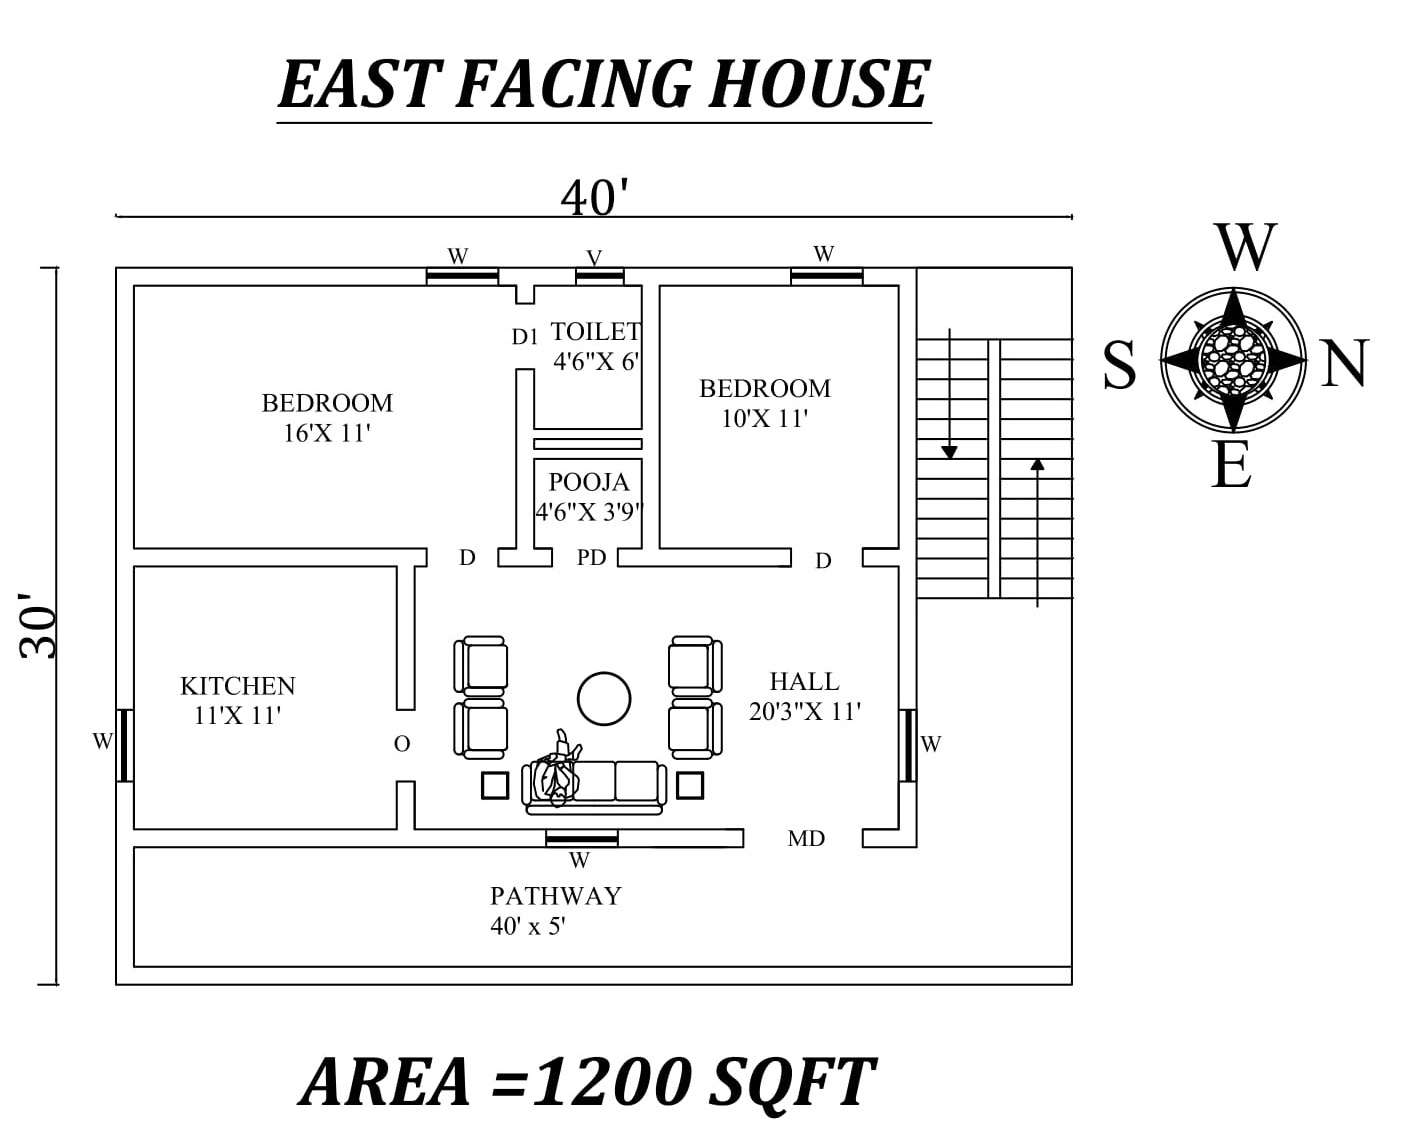 40'x30' The Perfect 2bhk East facing House Plan As Per Vastu Shastra